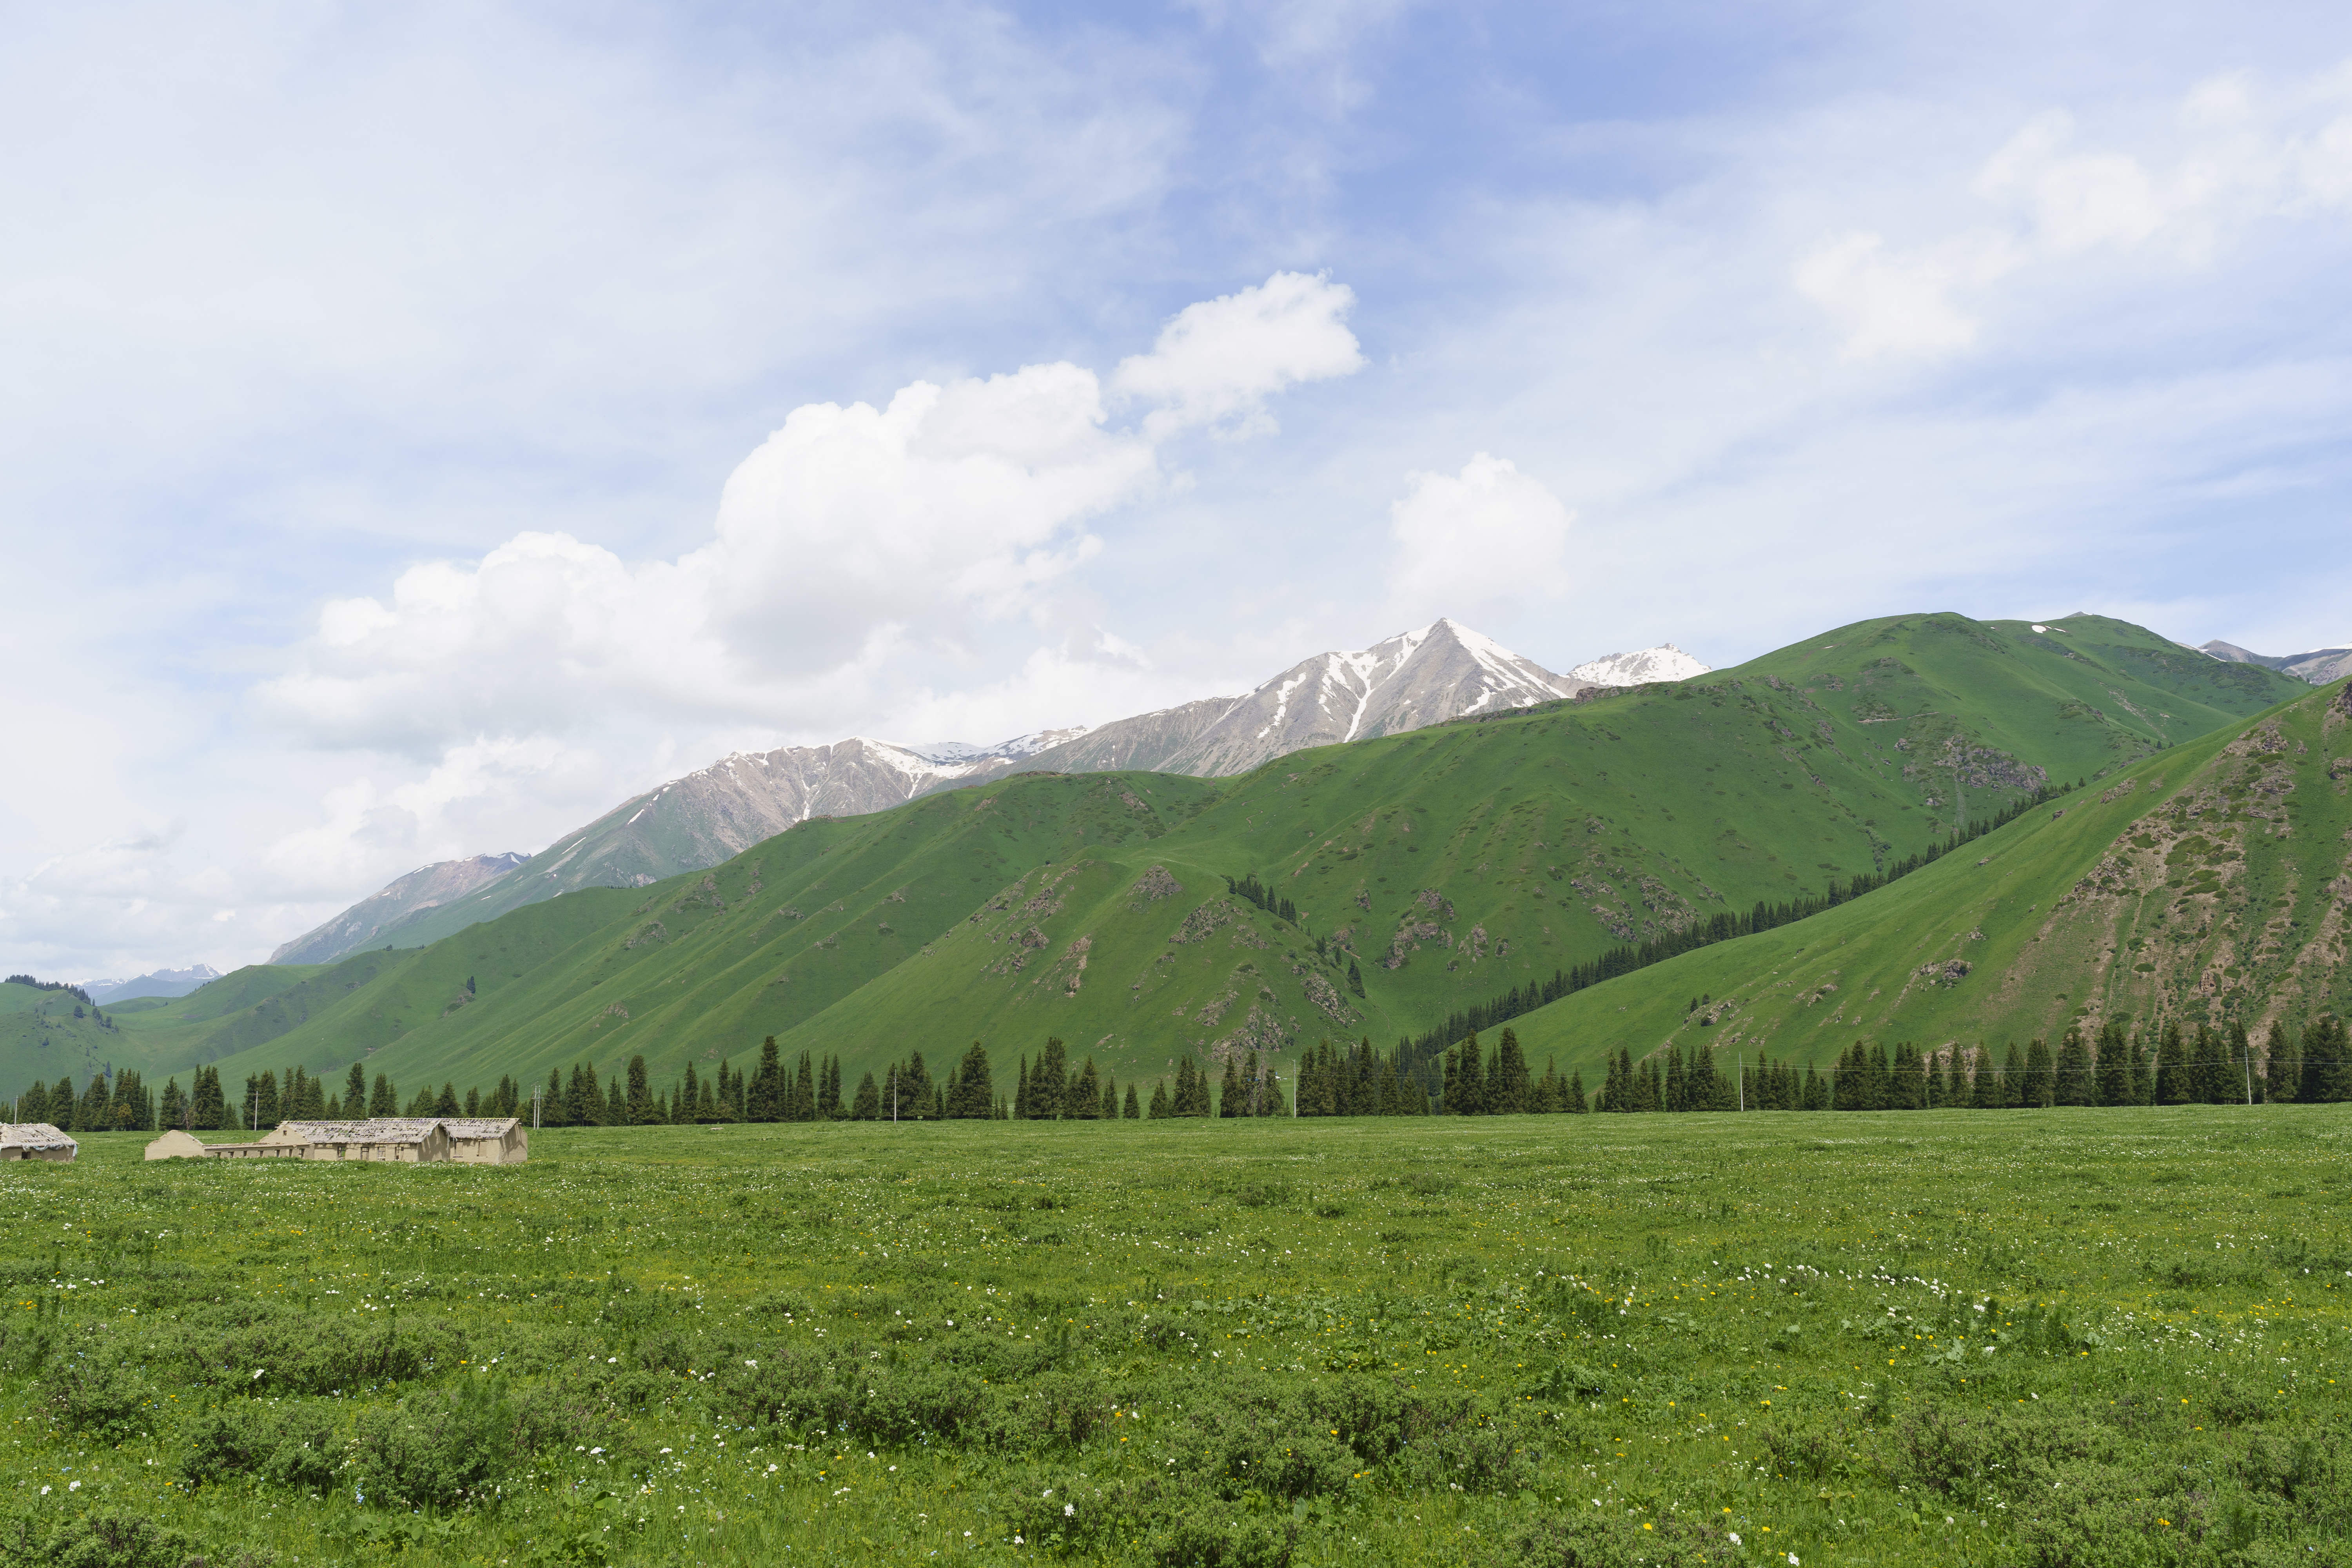 China Xinjiang Mountains Landscape Skyscape Clouds Grass Nature Sky Trees Snow 6000x4000